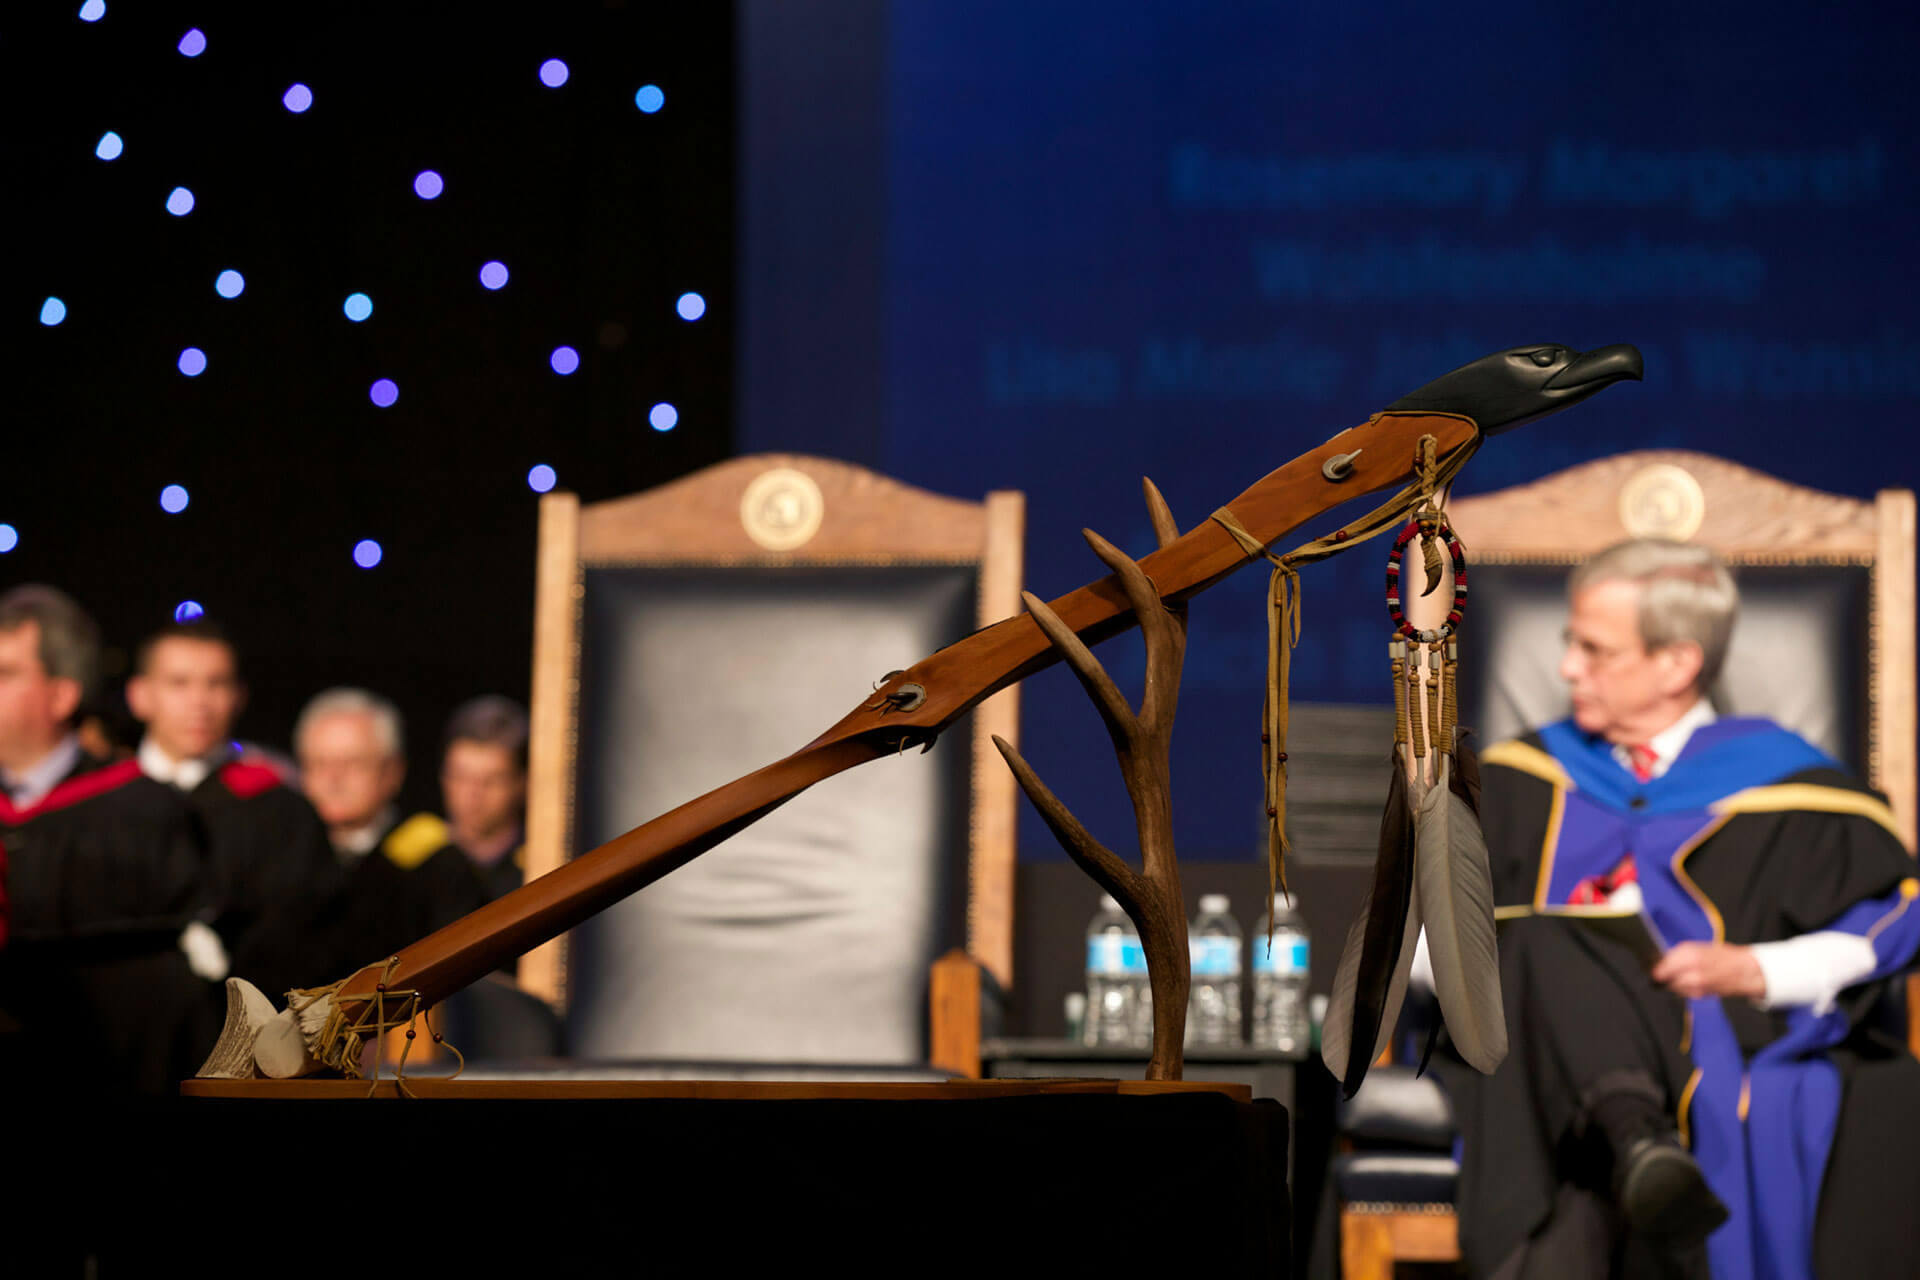 The Athabasca University Mace is displayed prominently at every convocation.